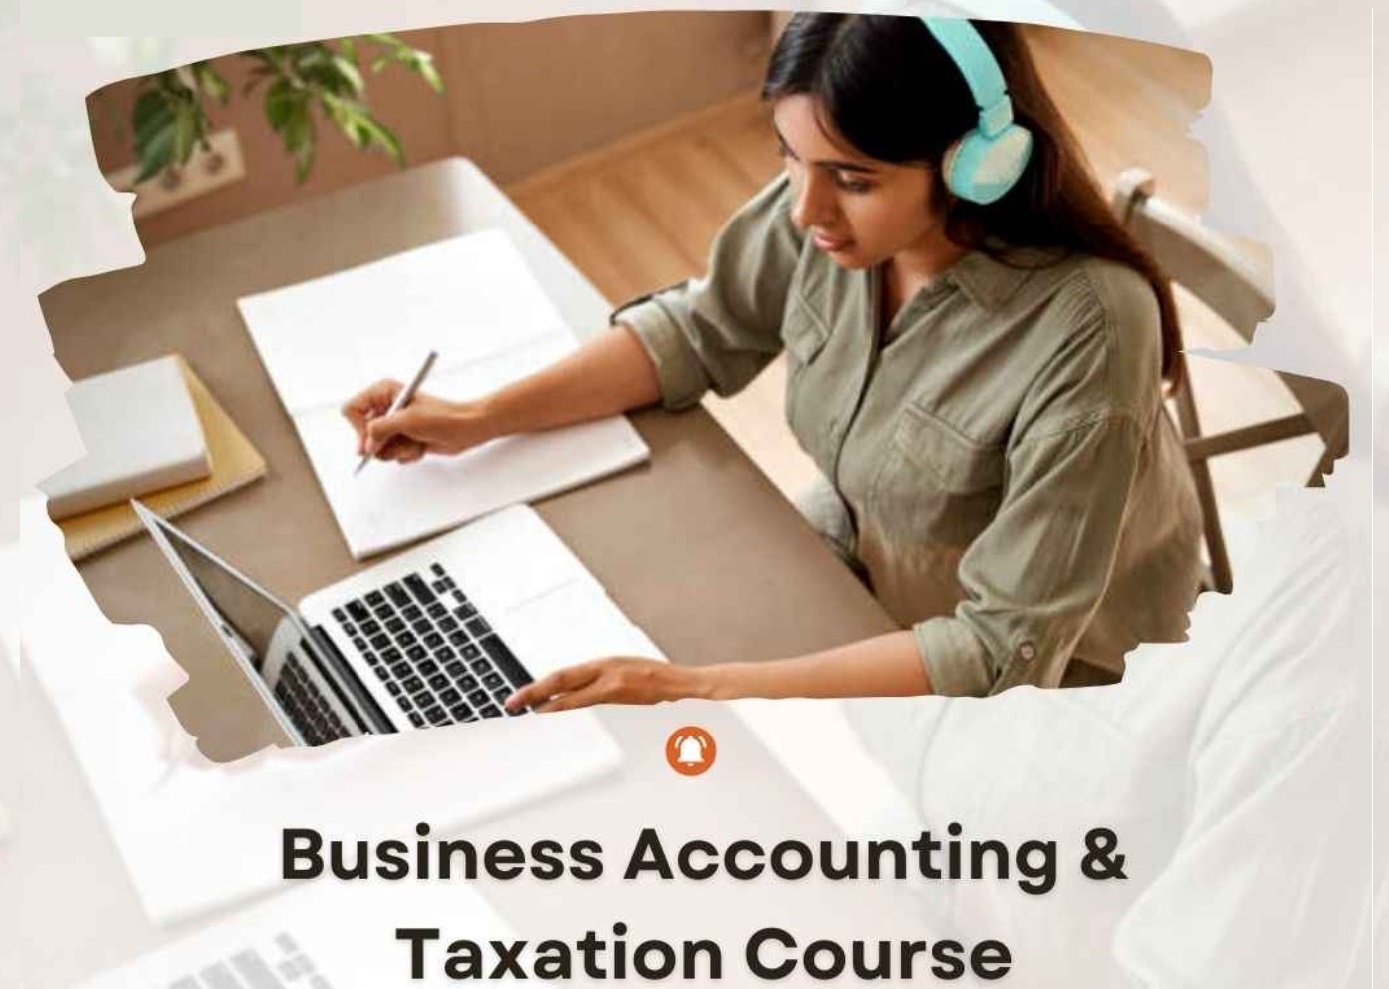 BAT Course, Business Accounting Taxation Course, BAT fees ,best institute for BAT course,Bat Course in Delhi,Bat Course Fees, Bat Course Online, Bat Course Institute, PGP-BAT Scope, Eligibility, Syllabus, Career, & Salary, BAT Course | Master Business Accounting & Taxation Course, What is Bat Course, Business Accounting and Taxation Course BAT,